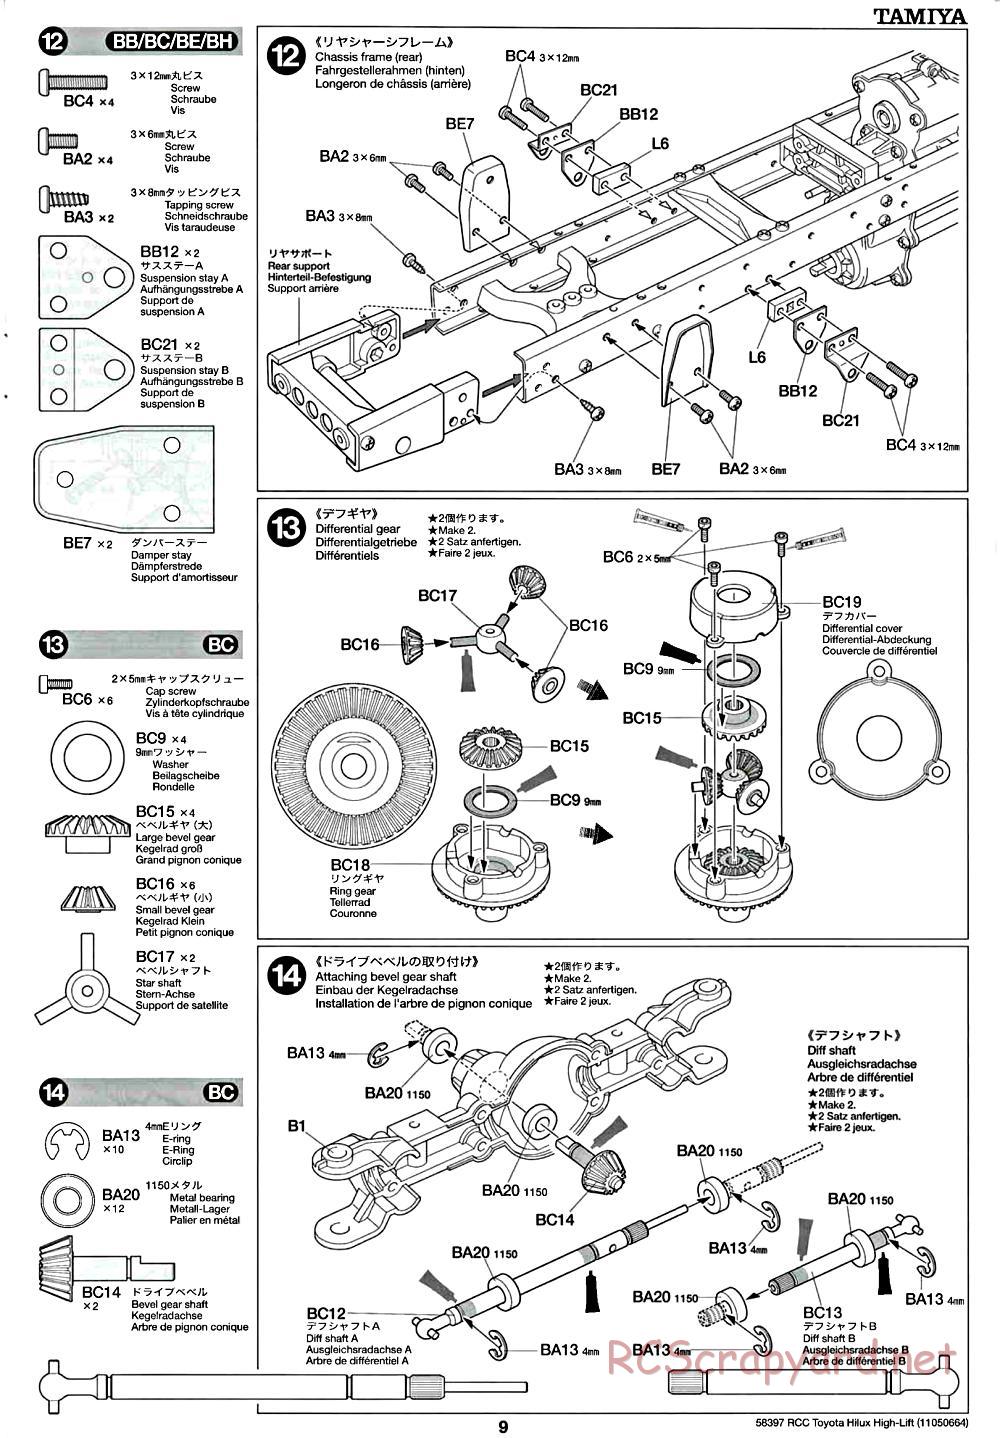 Tamiya - Toyota Hilux High-Lift Chassis - Manual - Page 9